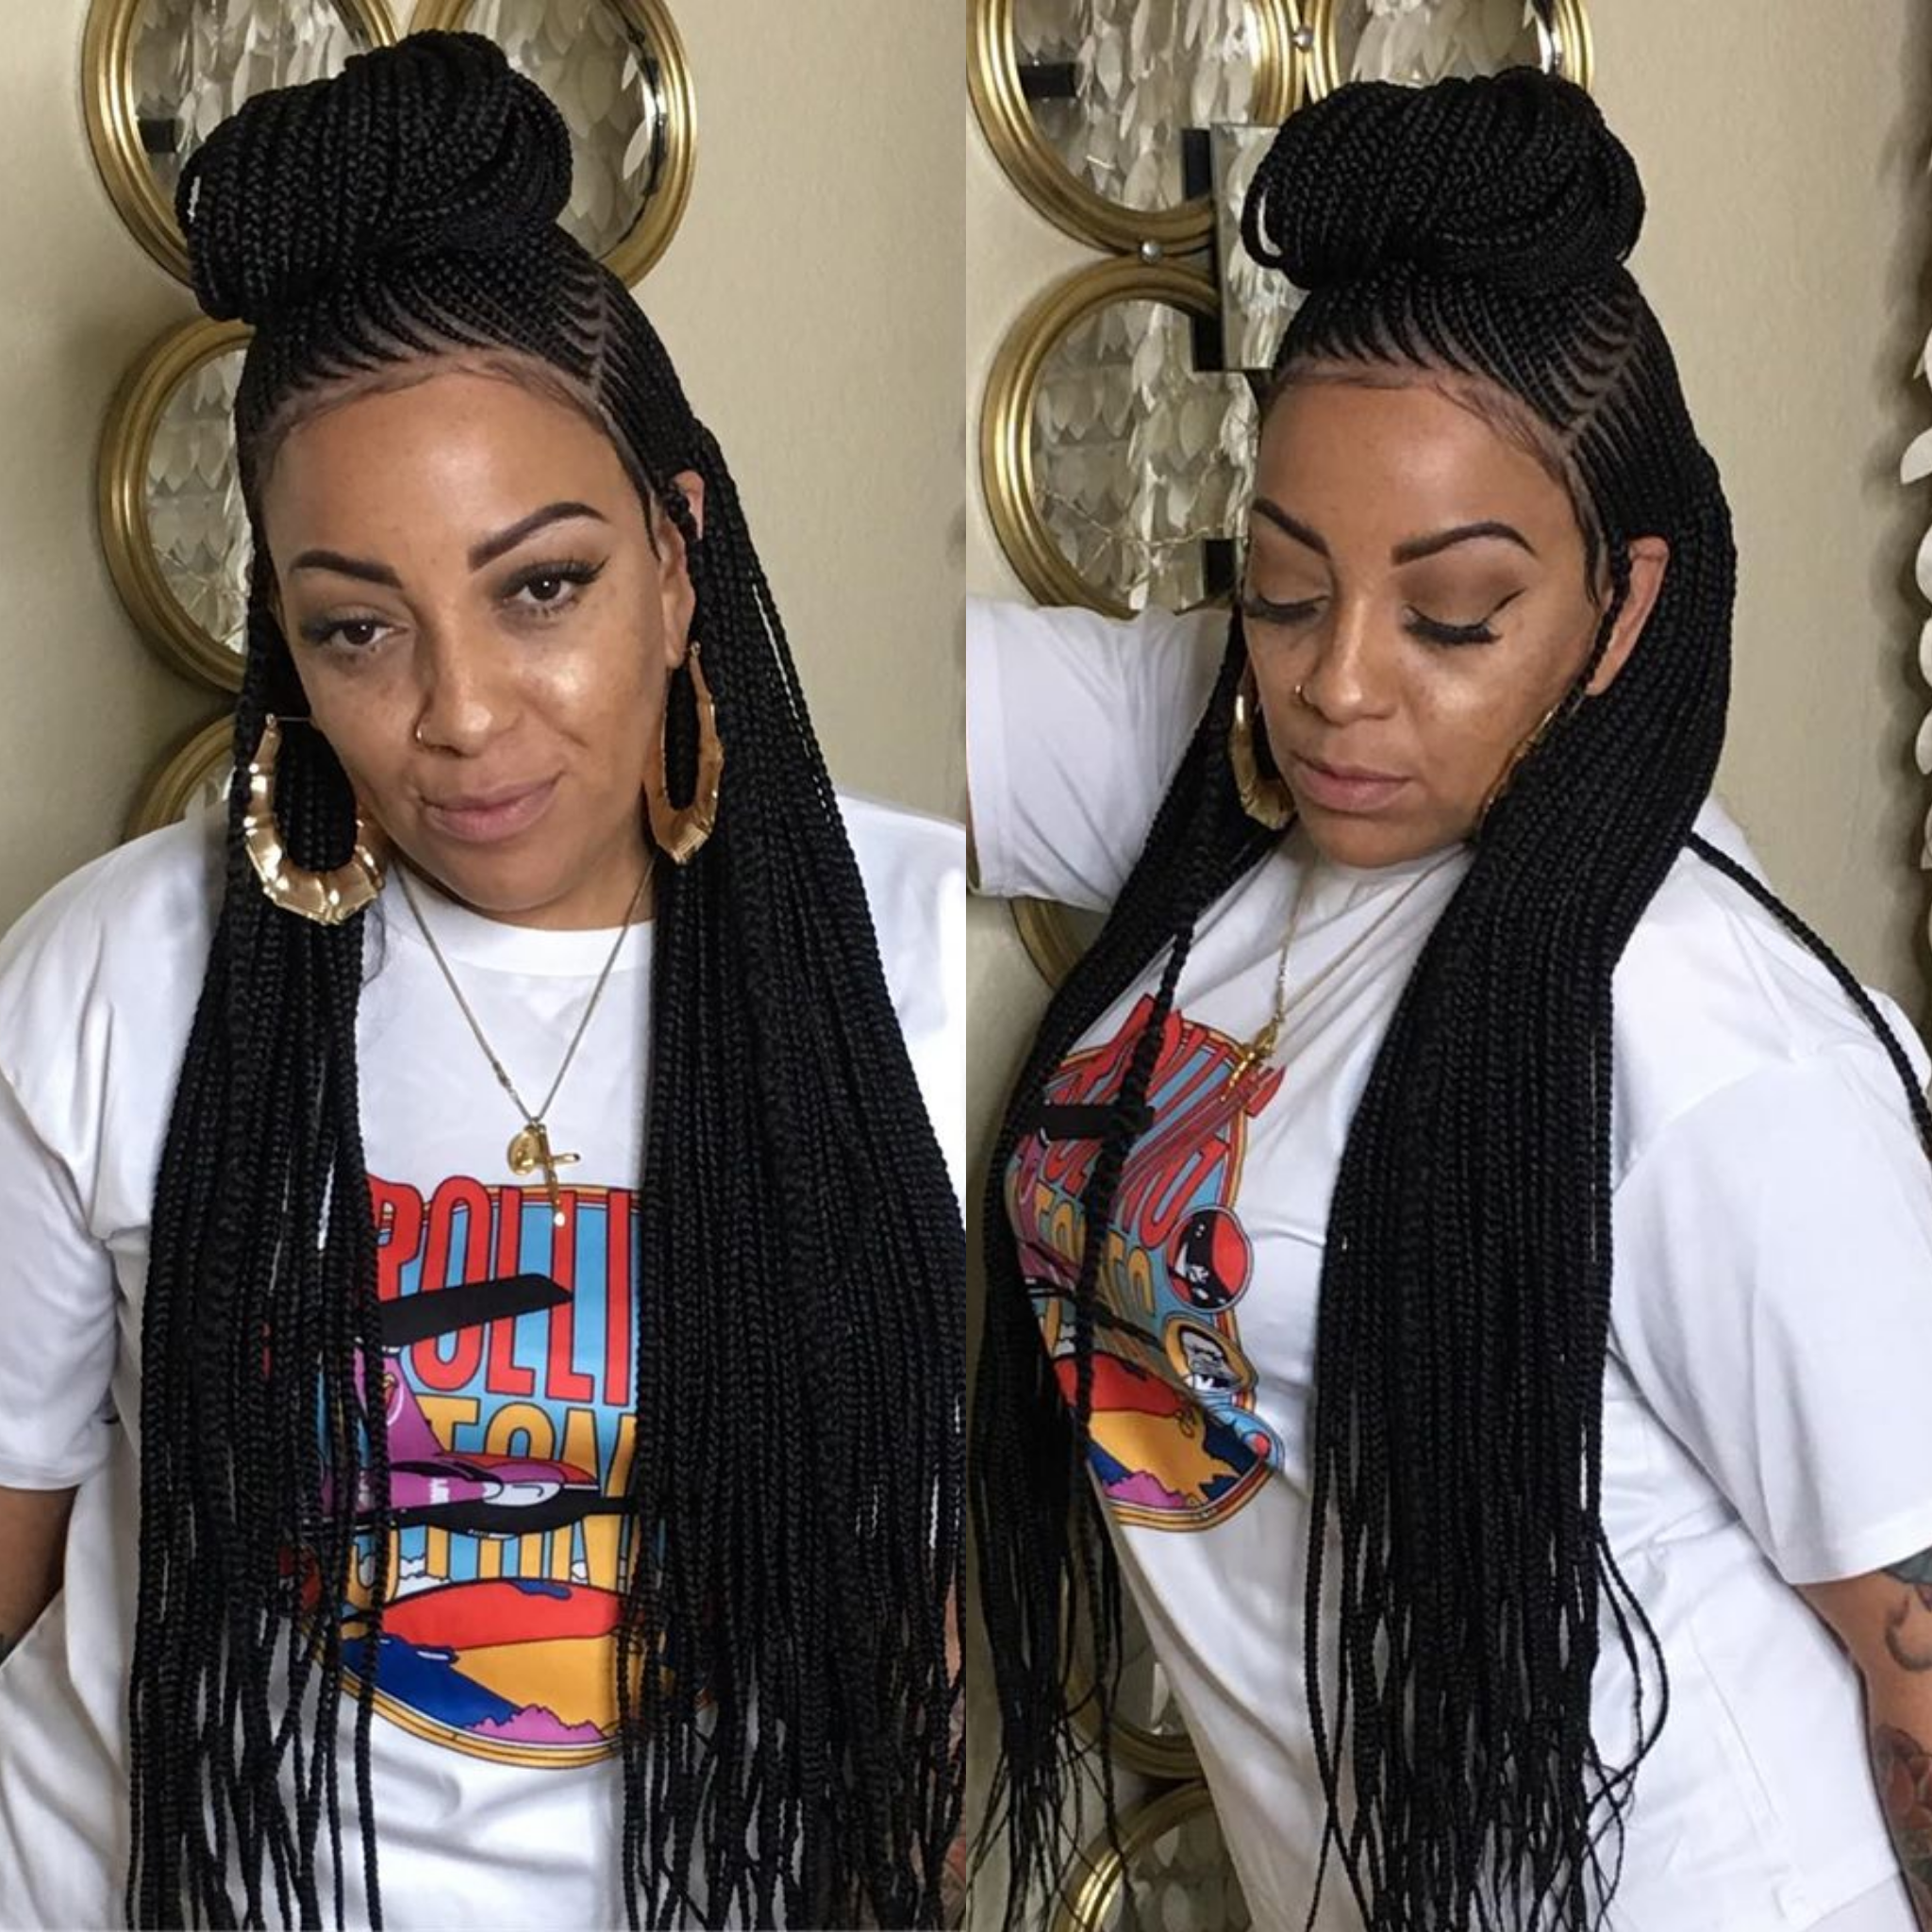 Full Lace Wig Coi Leray Knotless Braid – KhennyEsther Wigs